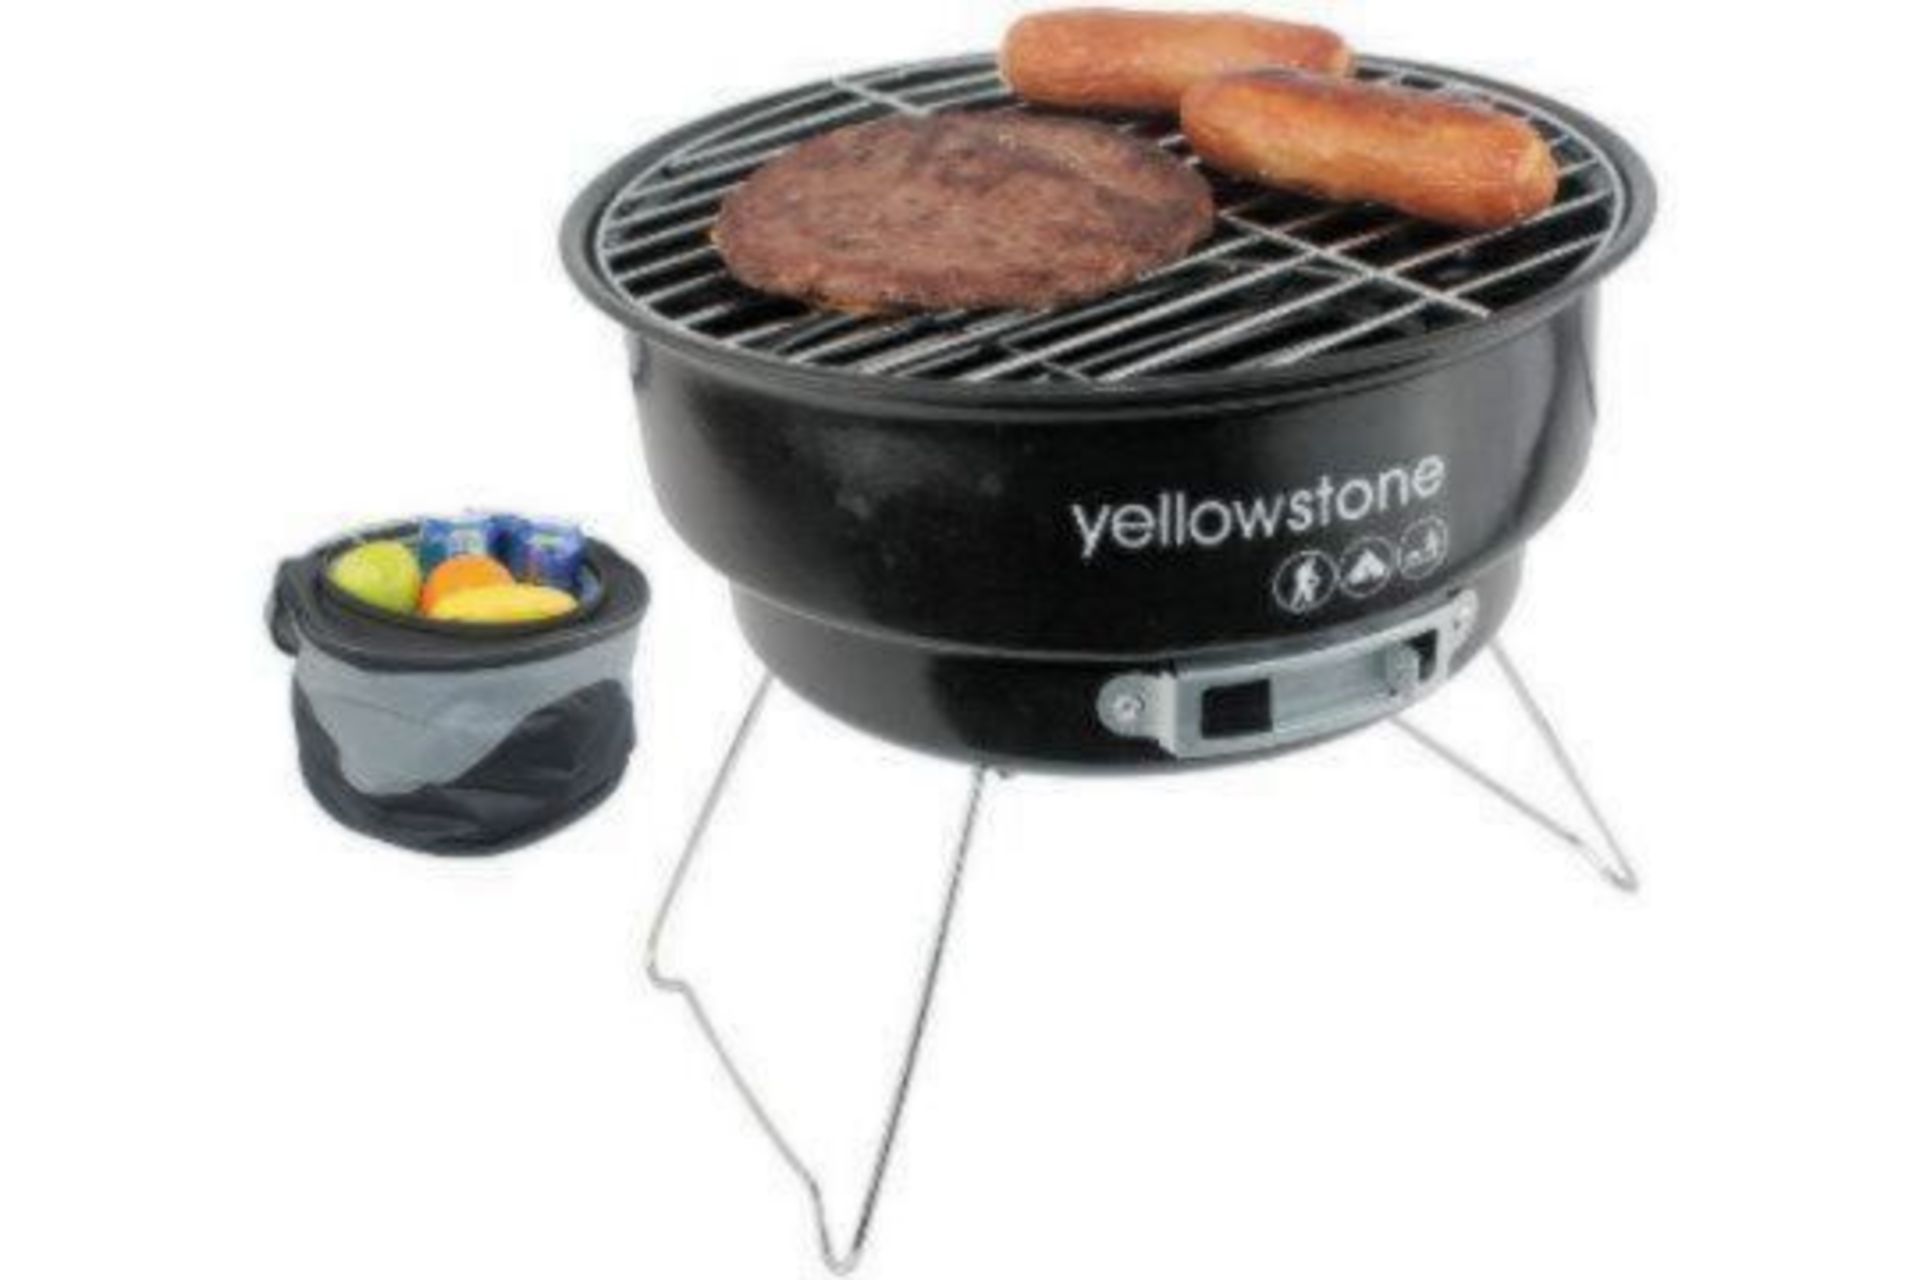 5 X BRAND NEW YELLOWSTONE FOLDING BBQ WITH COOLER BAGS R15